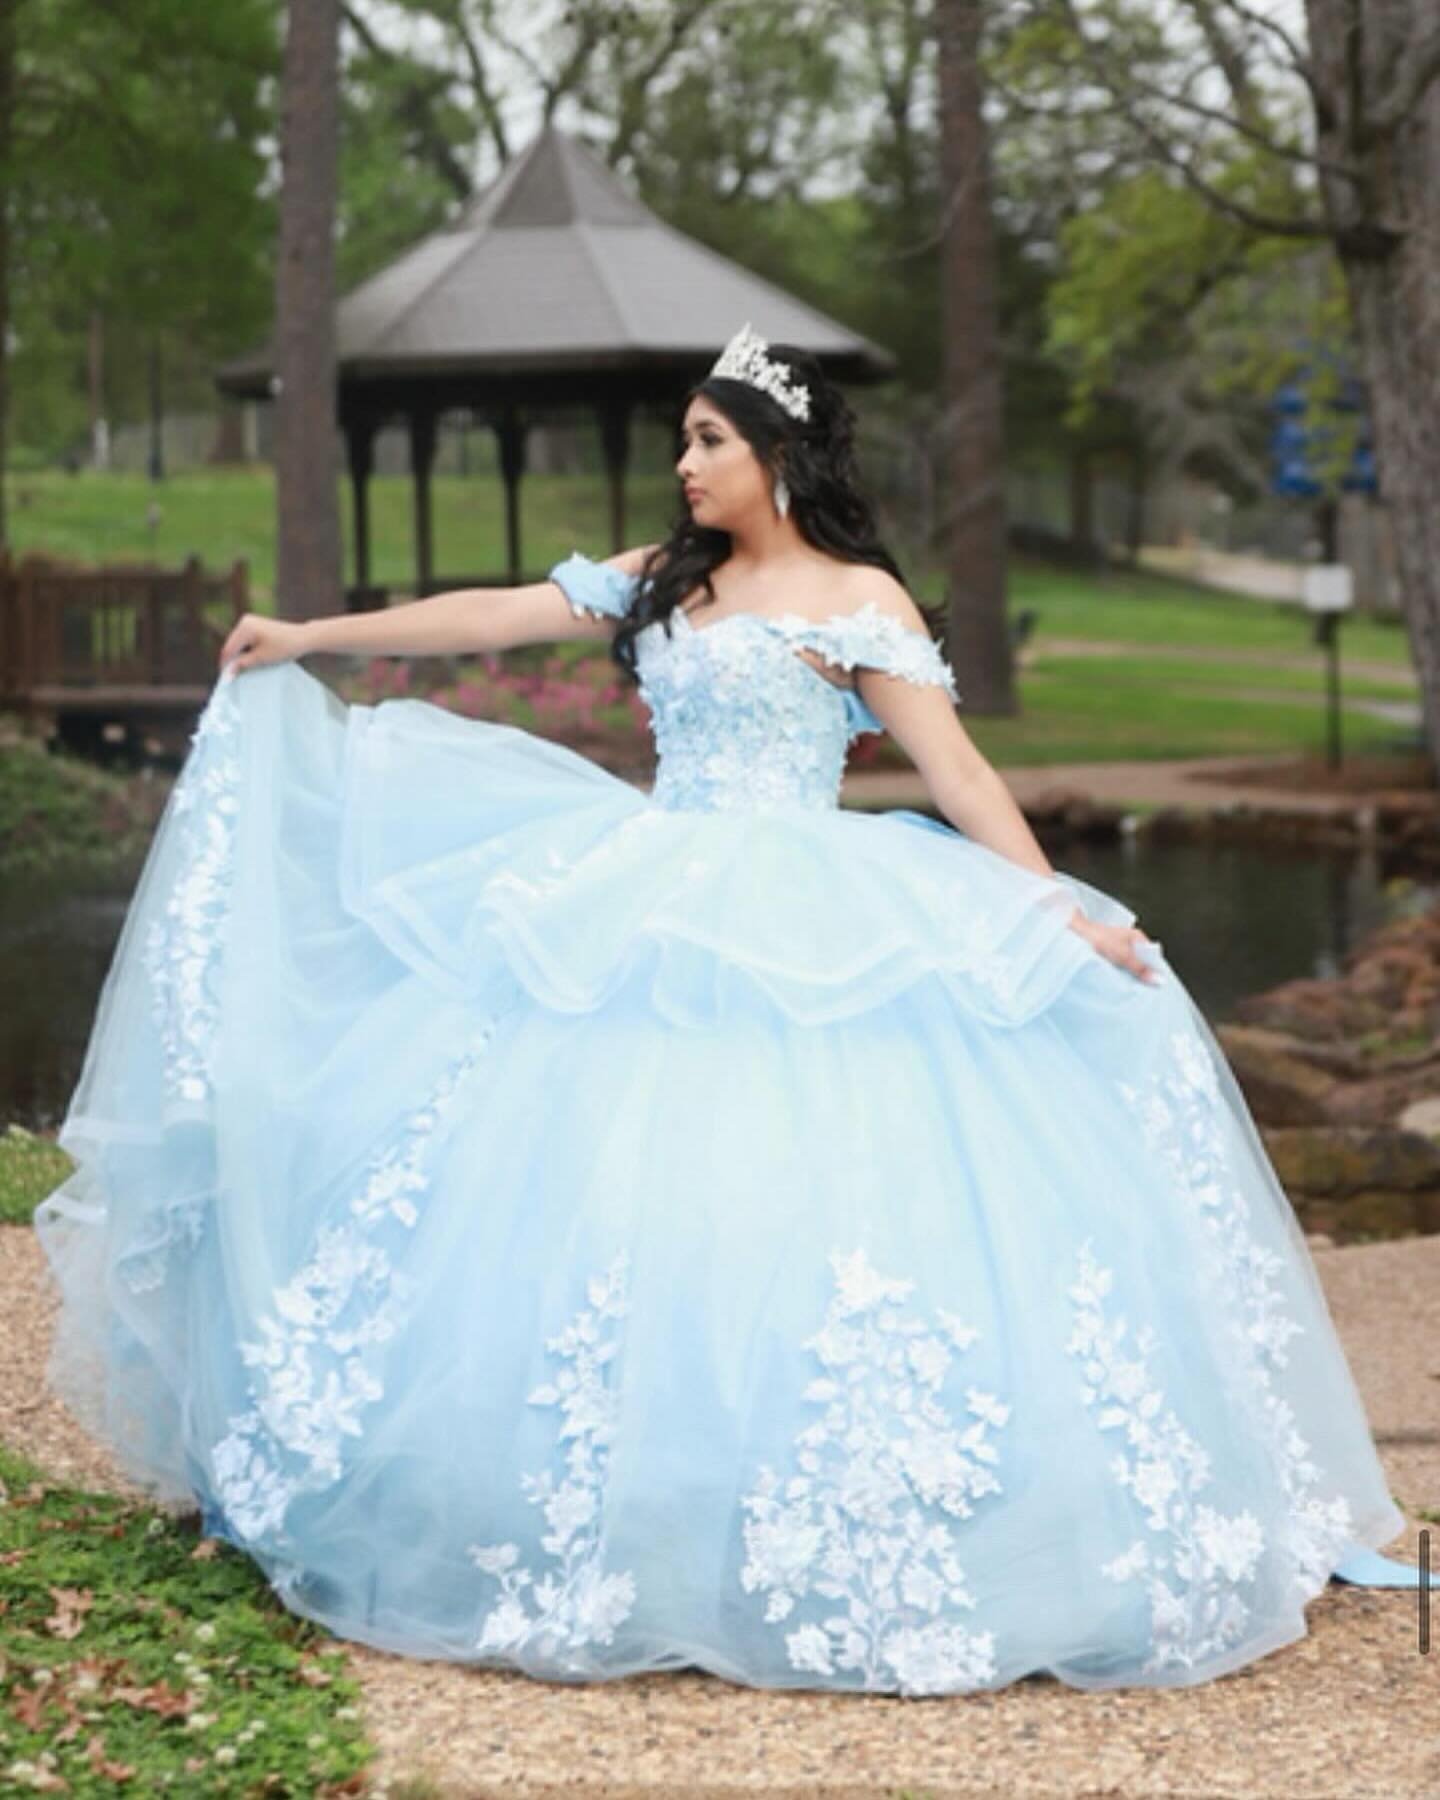 Thank you for sharing these beautiful pictures with us! We love to see and share them!! 🩵🥰
✨
✨ ✨
✨✨
✨✨✨
✨✨✨✨
✨✨✨✨✨
✨✨✨✨
✨✨✨
✨✨
✨
#mycastleboutique #pearland #pearlandtx #quincea&ntilde;era #quinceanera #quince #ballgown #sweet15 #dresses #partydres